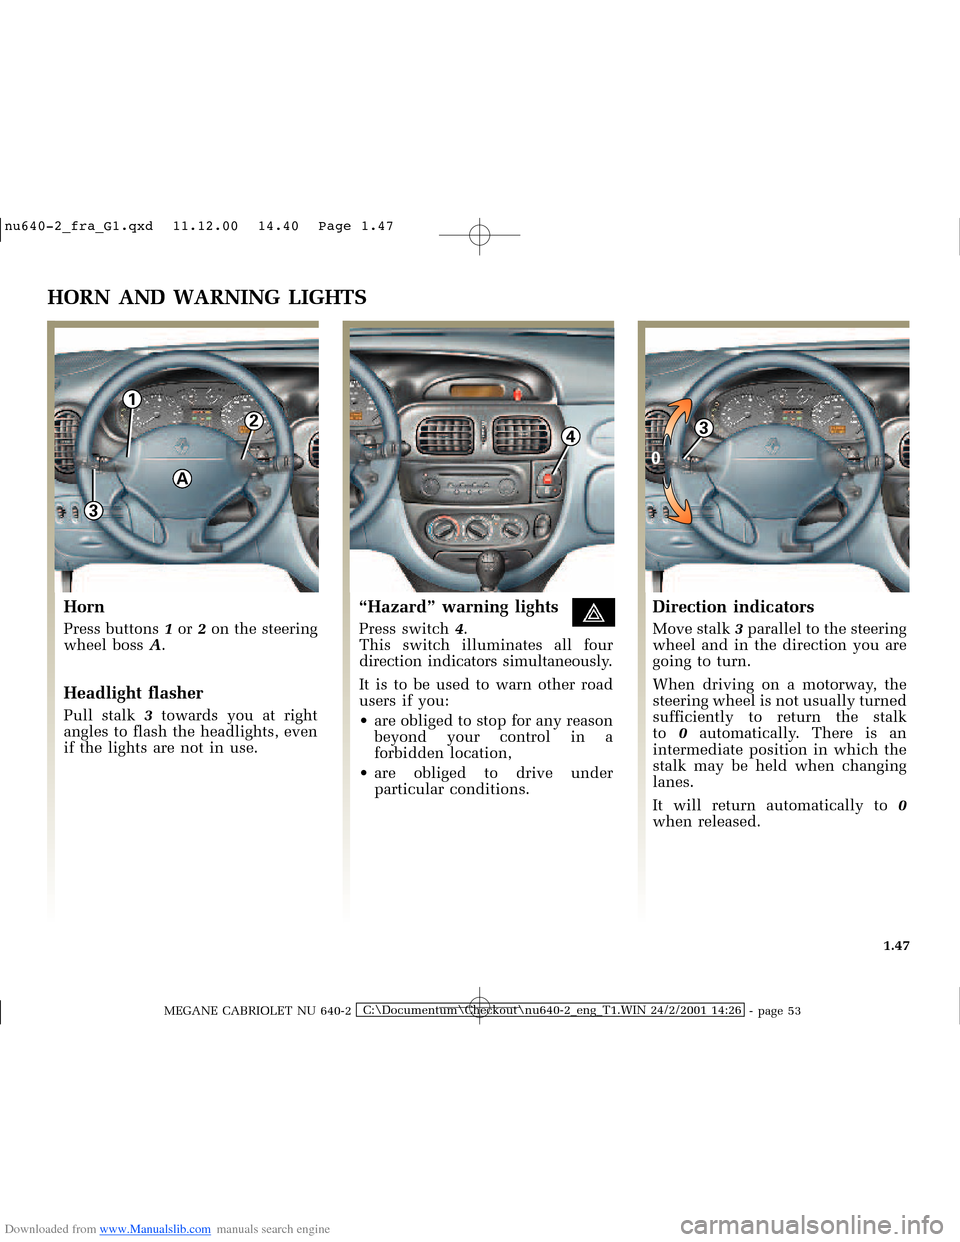 RENAULT MEGANE 2000 X64 / 1.G Workshop Manual Downloaded from www.Manualslib.com manuals search engine 3
A
2
1
43
0
�Q�X������B�I�U�D�B�*���T�[�G� � ��������� � ������ � �3�D�J�H� ����
MEGANE CABRIOLET NU 640-2C:\Do